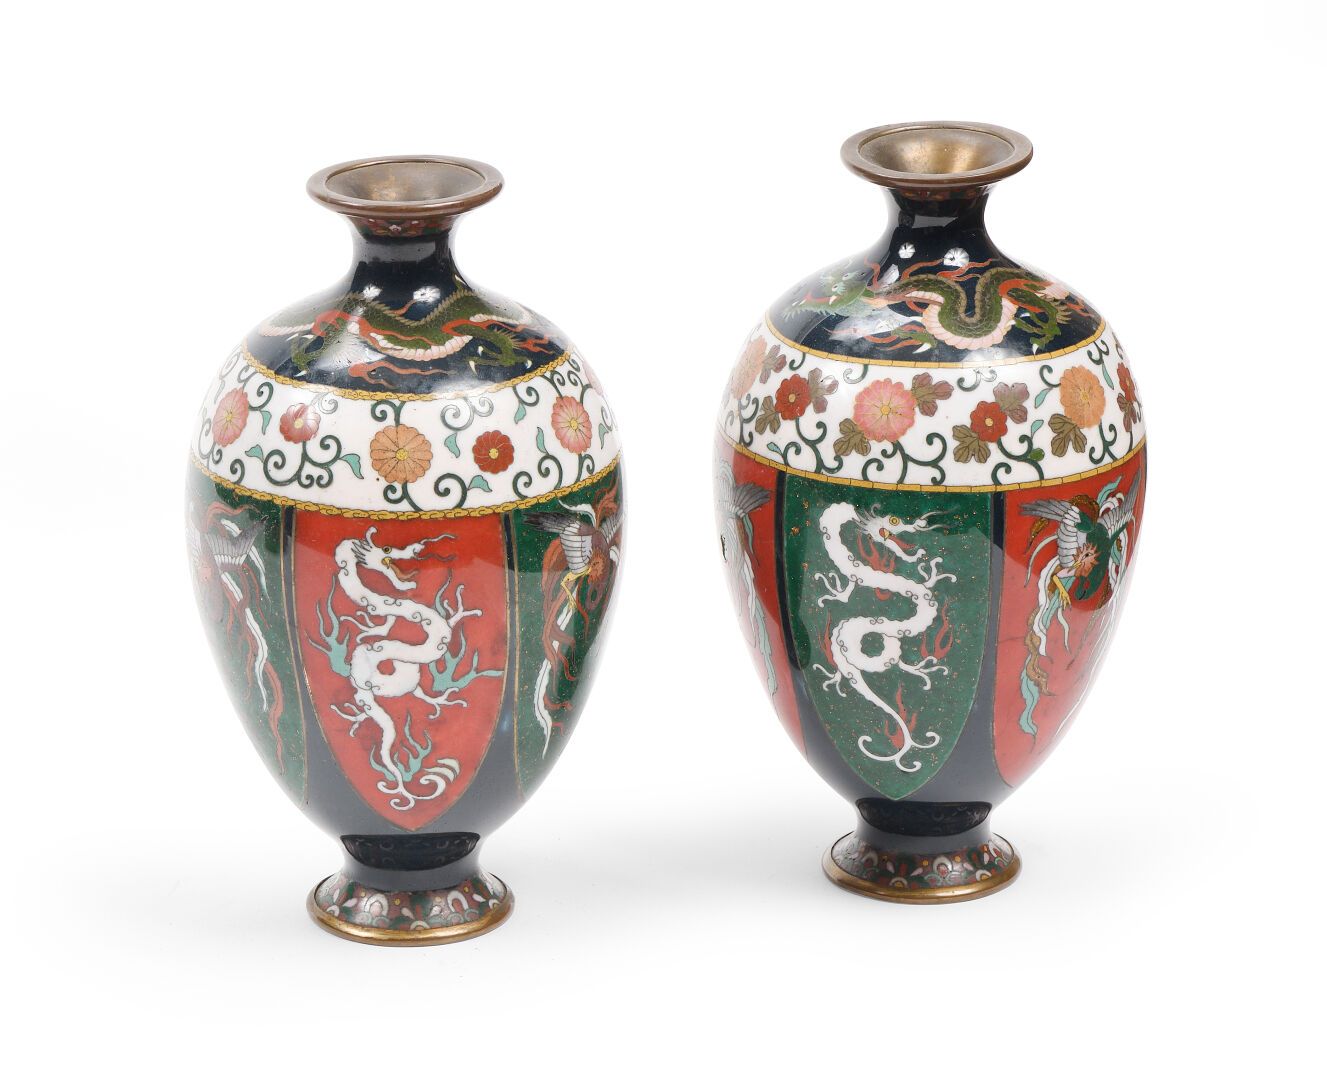 Null JAPAN, 20th century.

Pair of copper and cloisonné enamel vases, the ovoid &hellip;